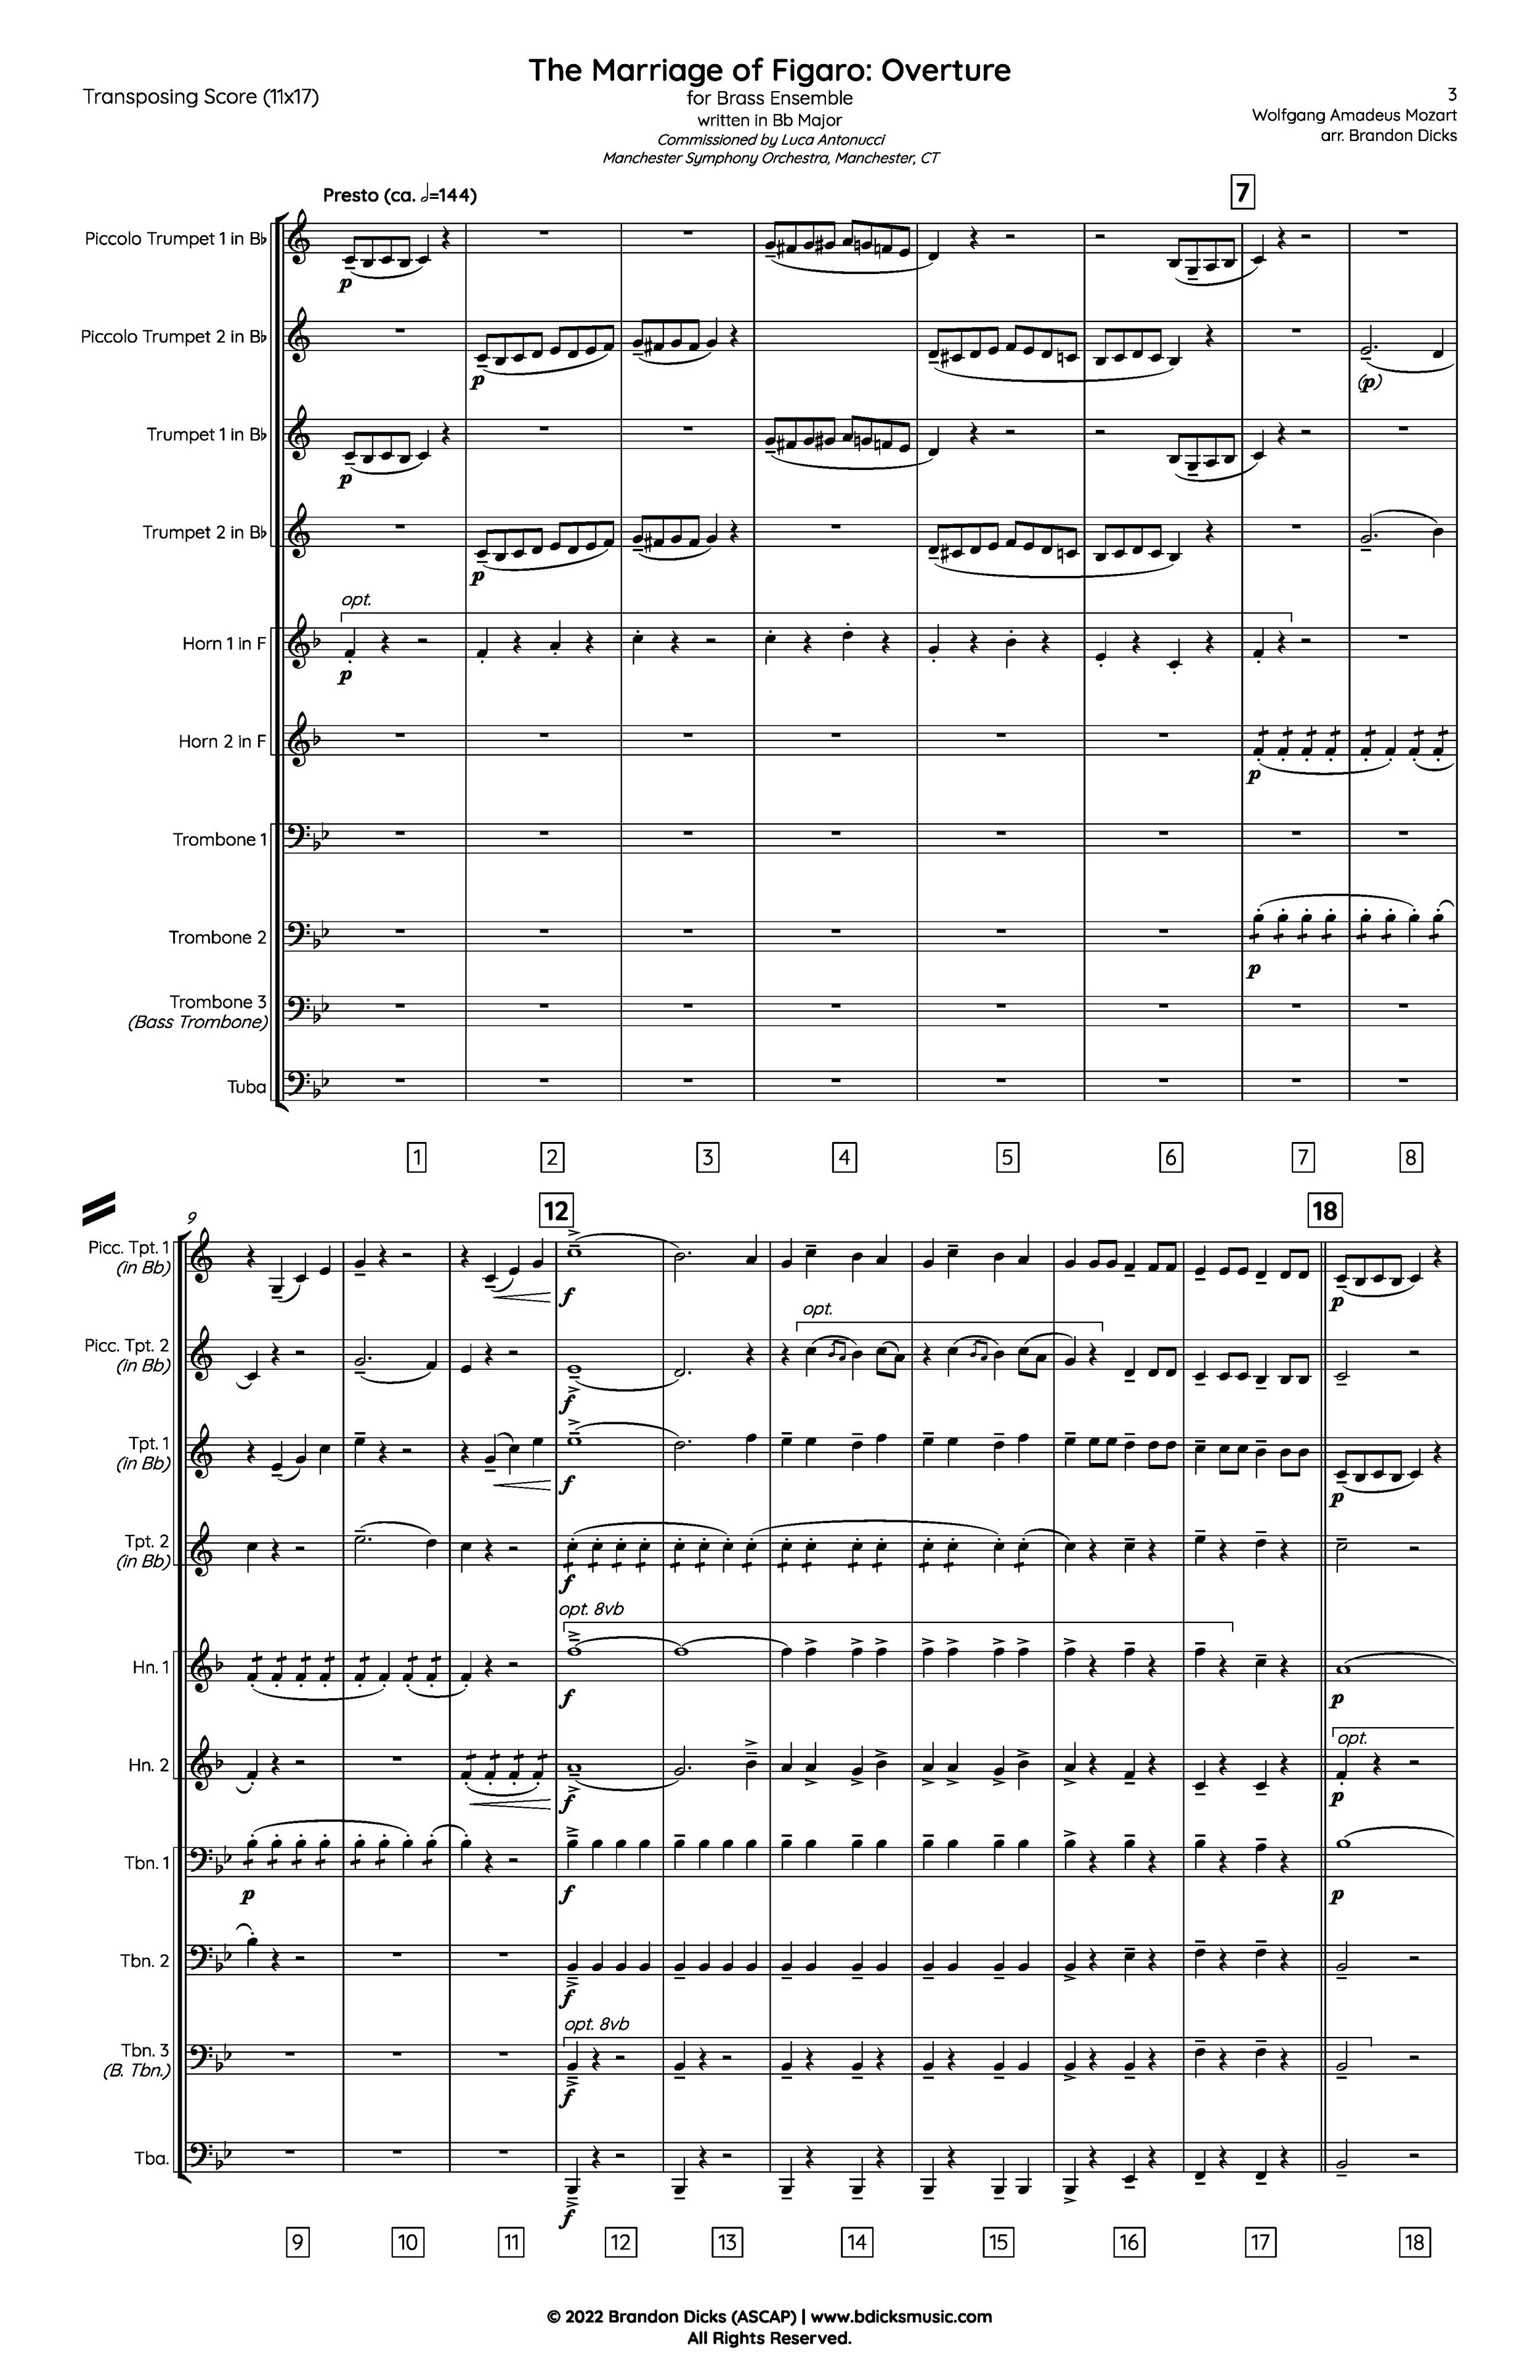 Marriage of Figaro [Brass Ensemble] in Bb - Score 11x17_Page_03.jpg